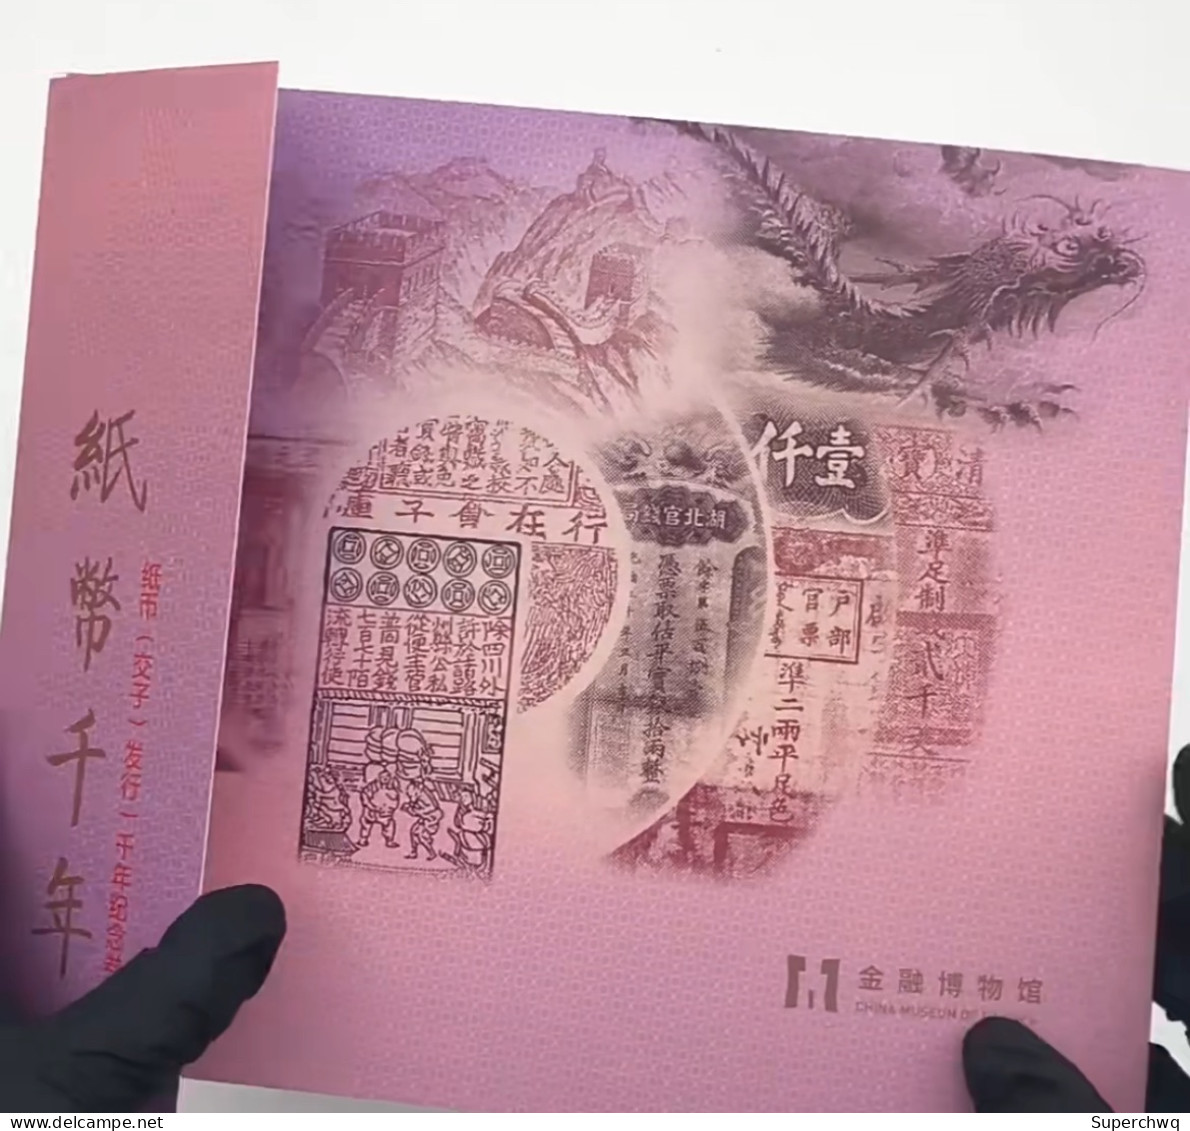 China Banknote Collection ，Paper Money (Jiaozi) Issued 1000 Fluorescent The Year Of The Loong Commemorative Coupons In T - China